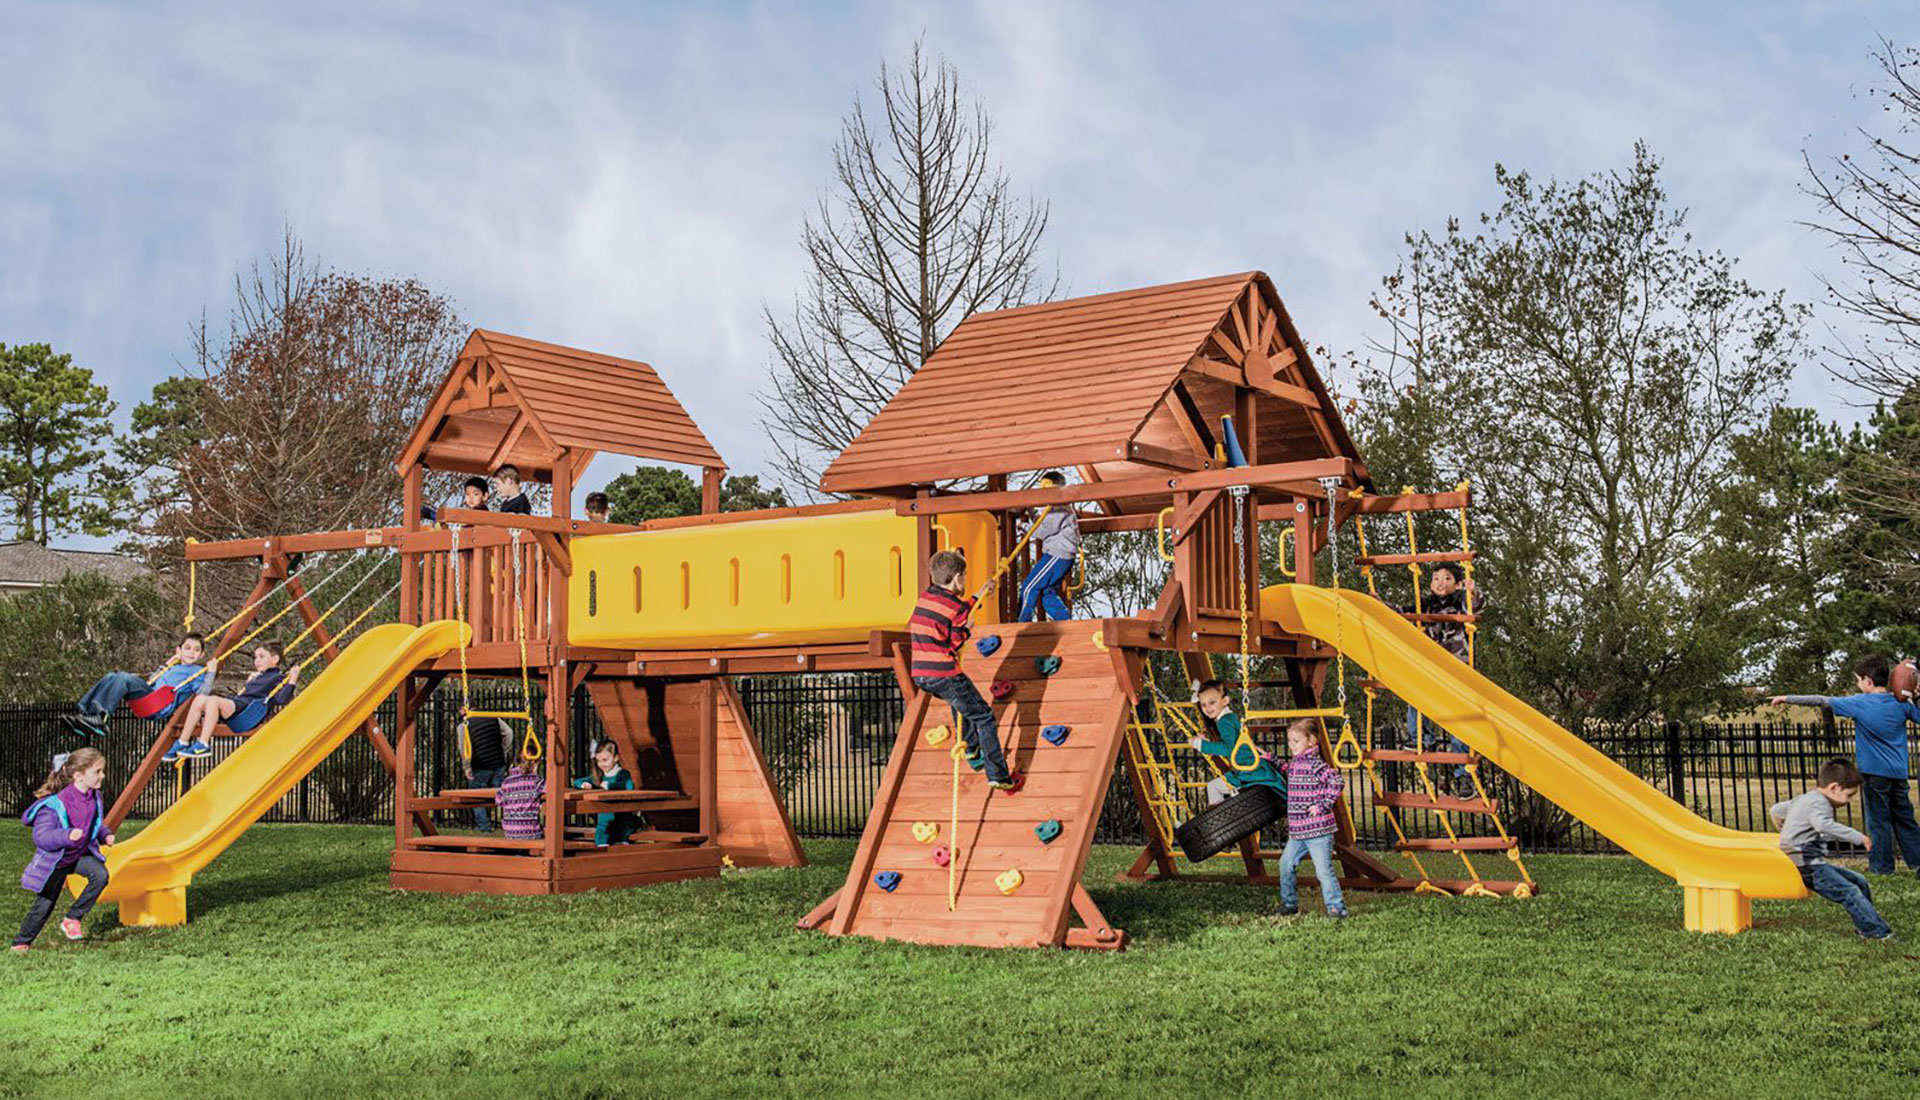 Playsets & Swing Sets